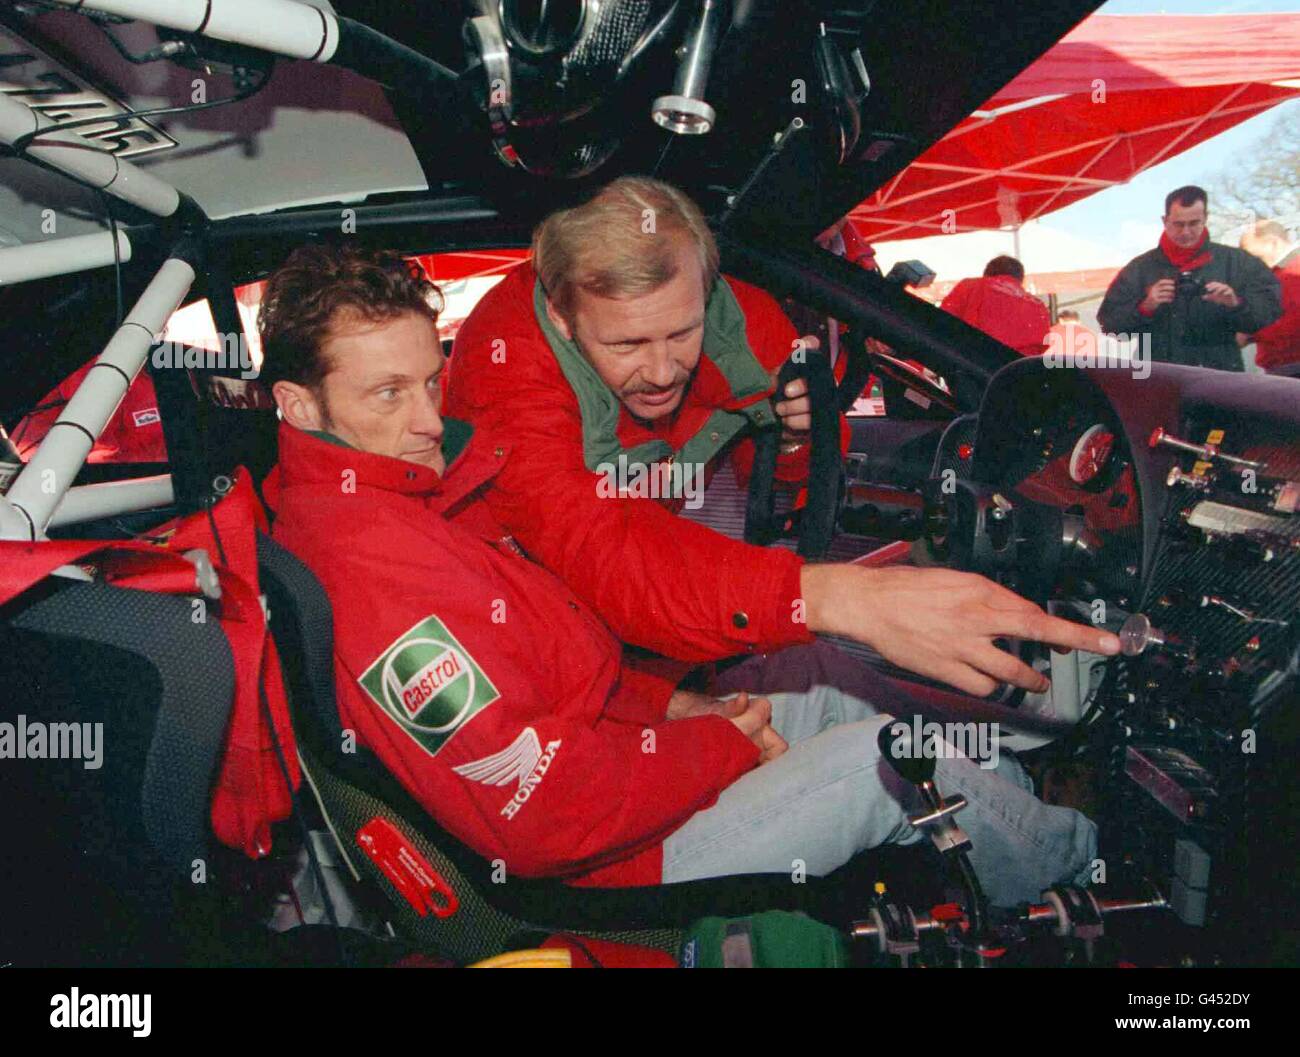 Former champion Juha Kankkunen explains the cockpit of his Toyota GT 4 to Karl Fogerty during the final preparations for this weekend's RAC Rally. The three-day event gets underway from Chester Racecourse on Saturday mornnig. PA. SEE PA STORY AUTO Rally. Stock Photo